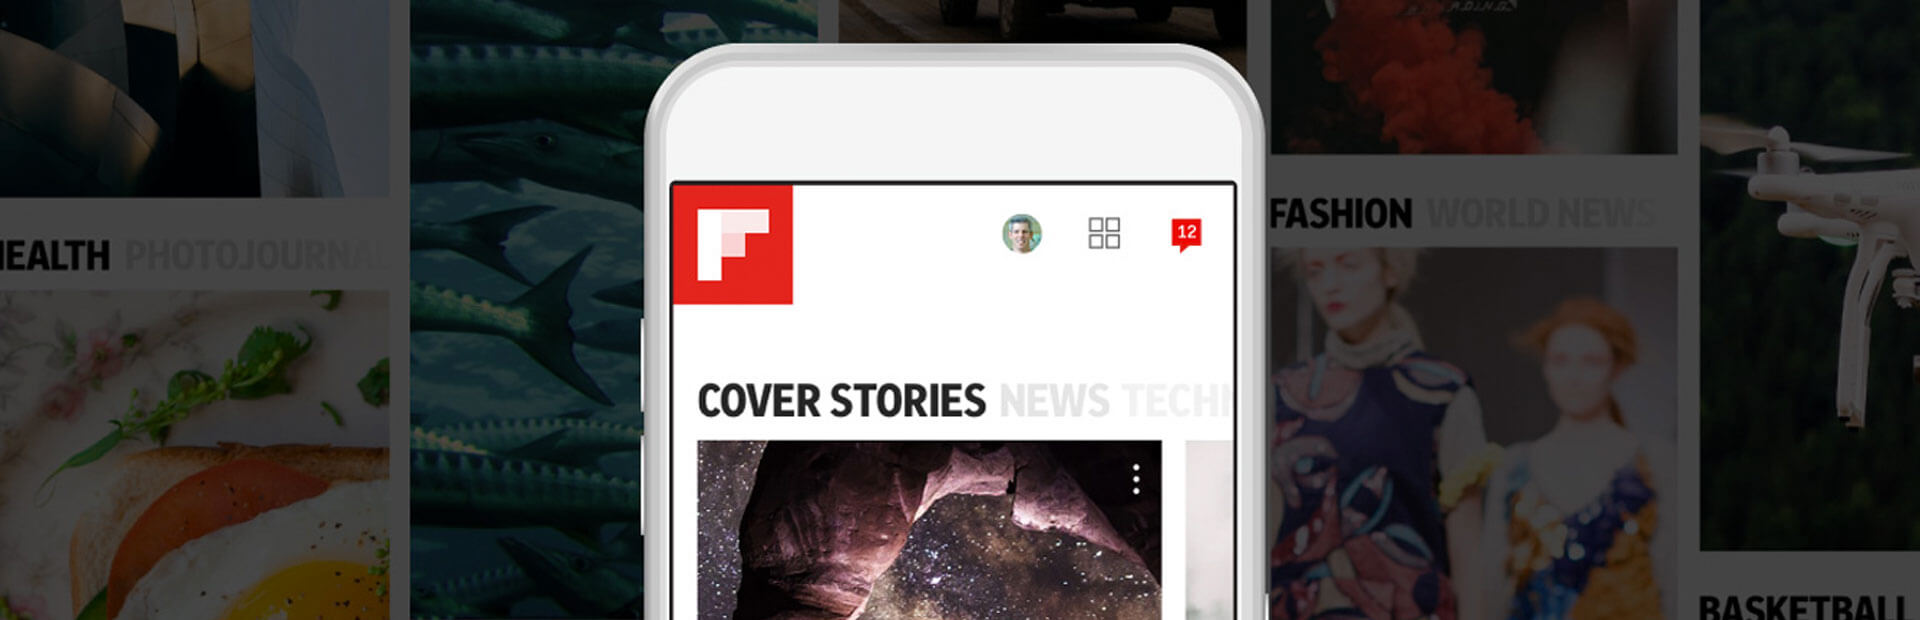 How To Use Flipboard To Grow Your Content Marketing Reach